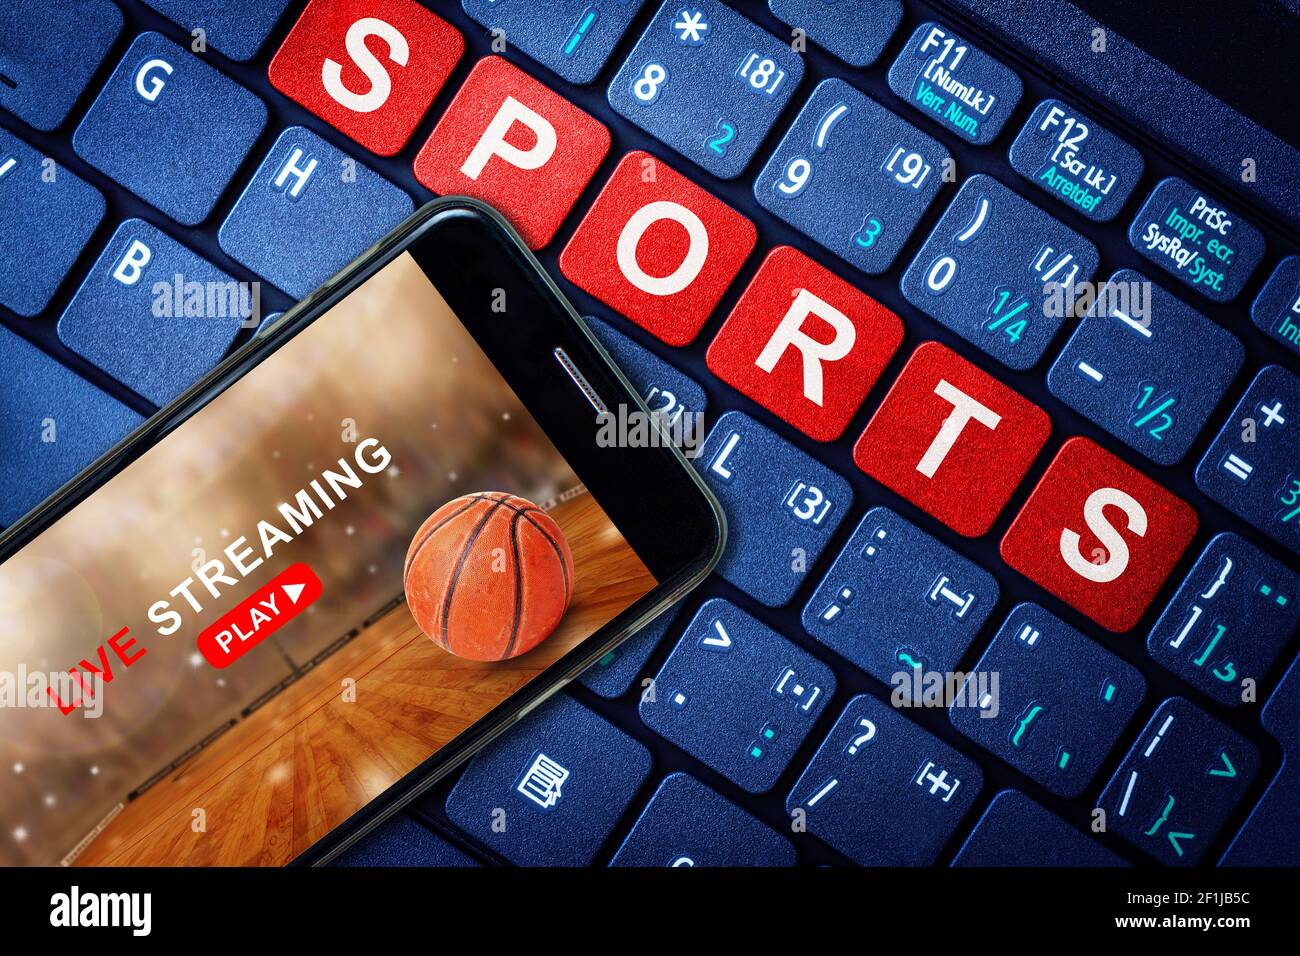 Sports Live streaming concept showing Basketball game broadcast on smartphone with laptop high tech background. Accessible on demand digital content i Stock Photo